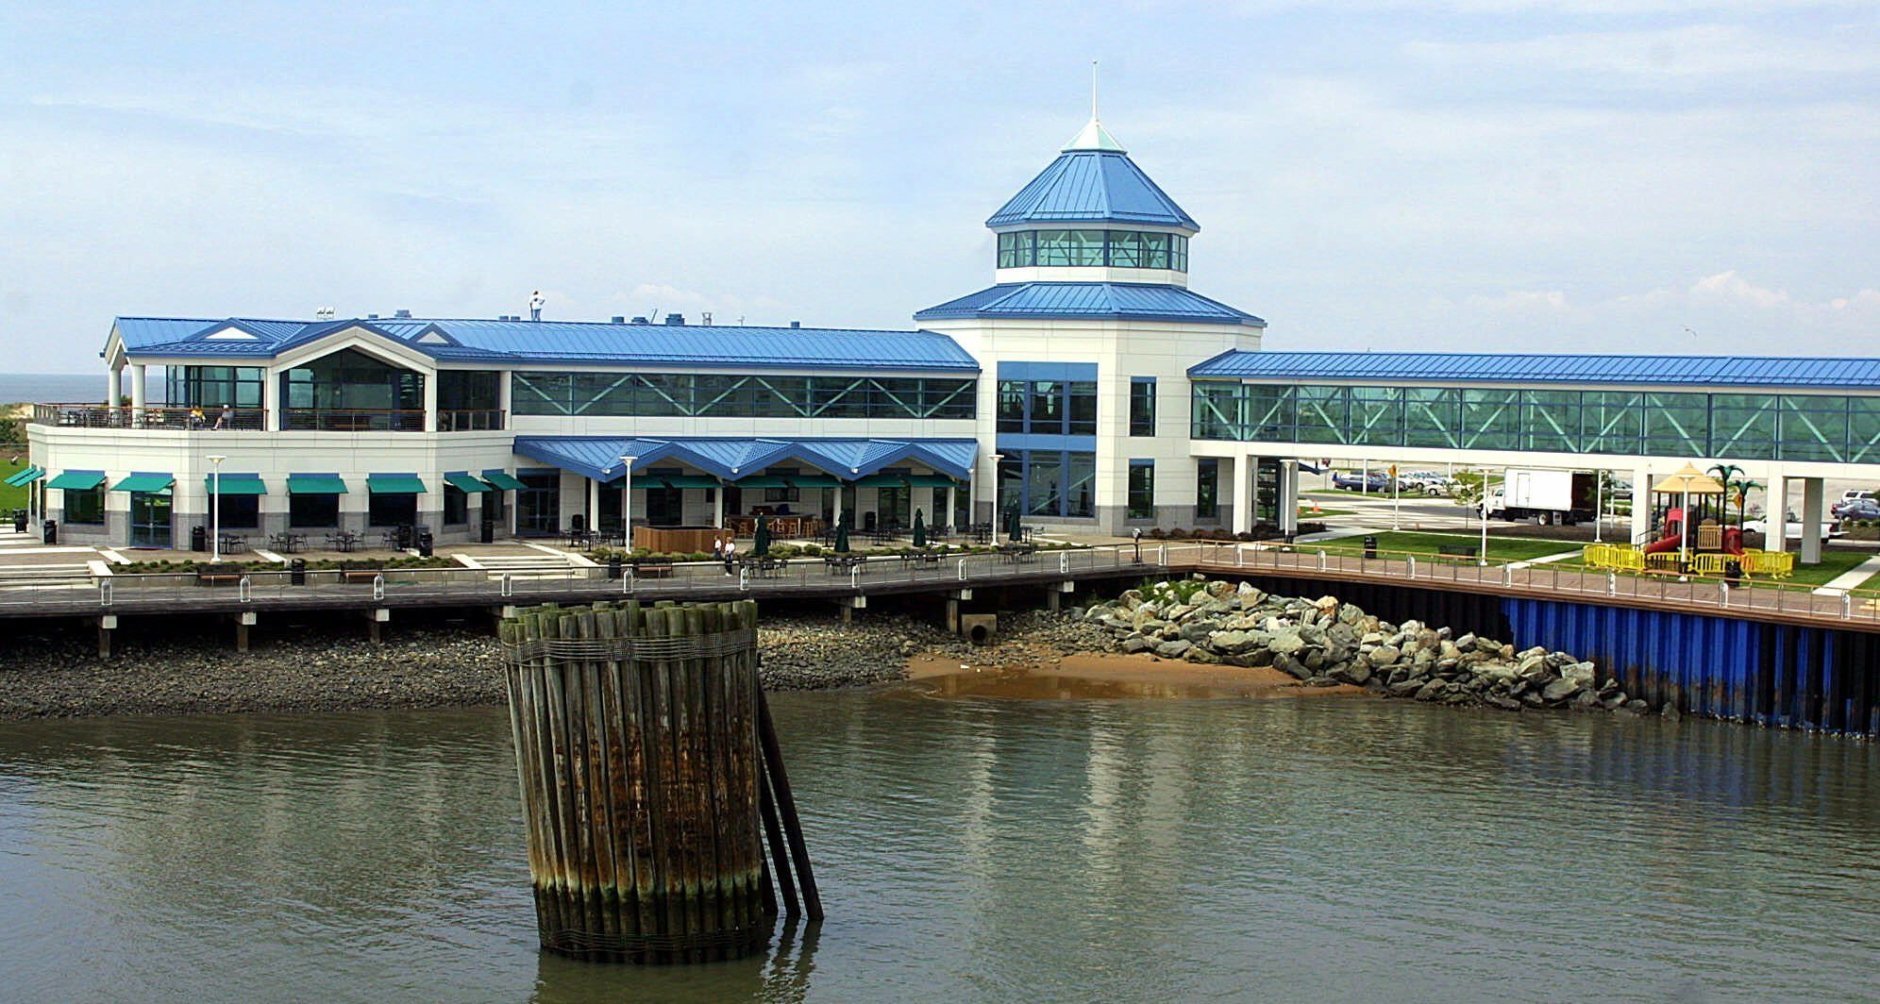 An $11.5 million passenger terminal for the Cape May Lewes Ferry opened Thursday June 7, 2001, in Cape May, N.J. The terminal includes a glass enclosed bridge which connects to the ferry as well as a art gallery, gift shop, out door playground and miniature golf course. (AP Photo Chris Polk)